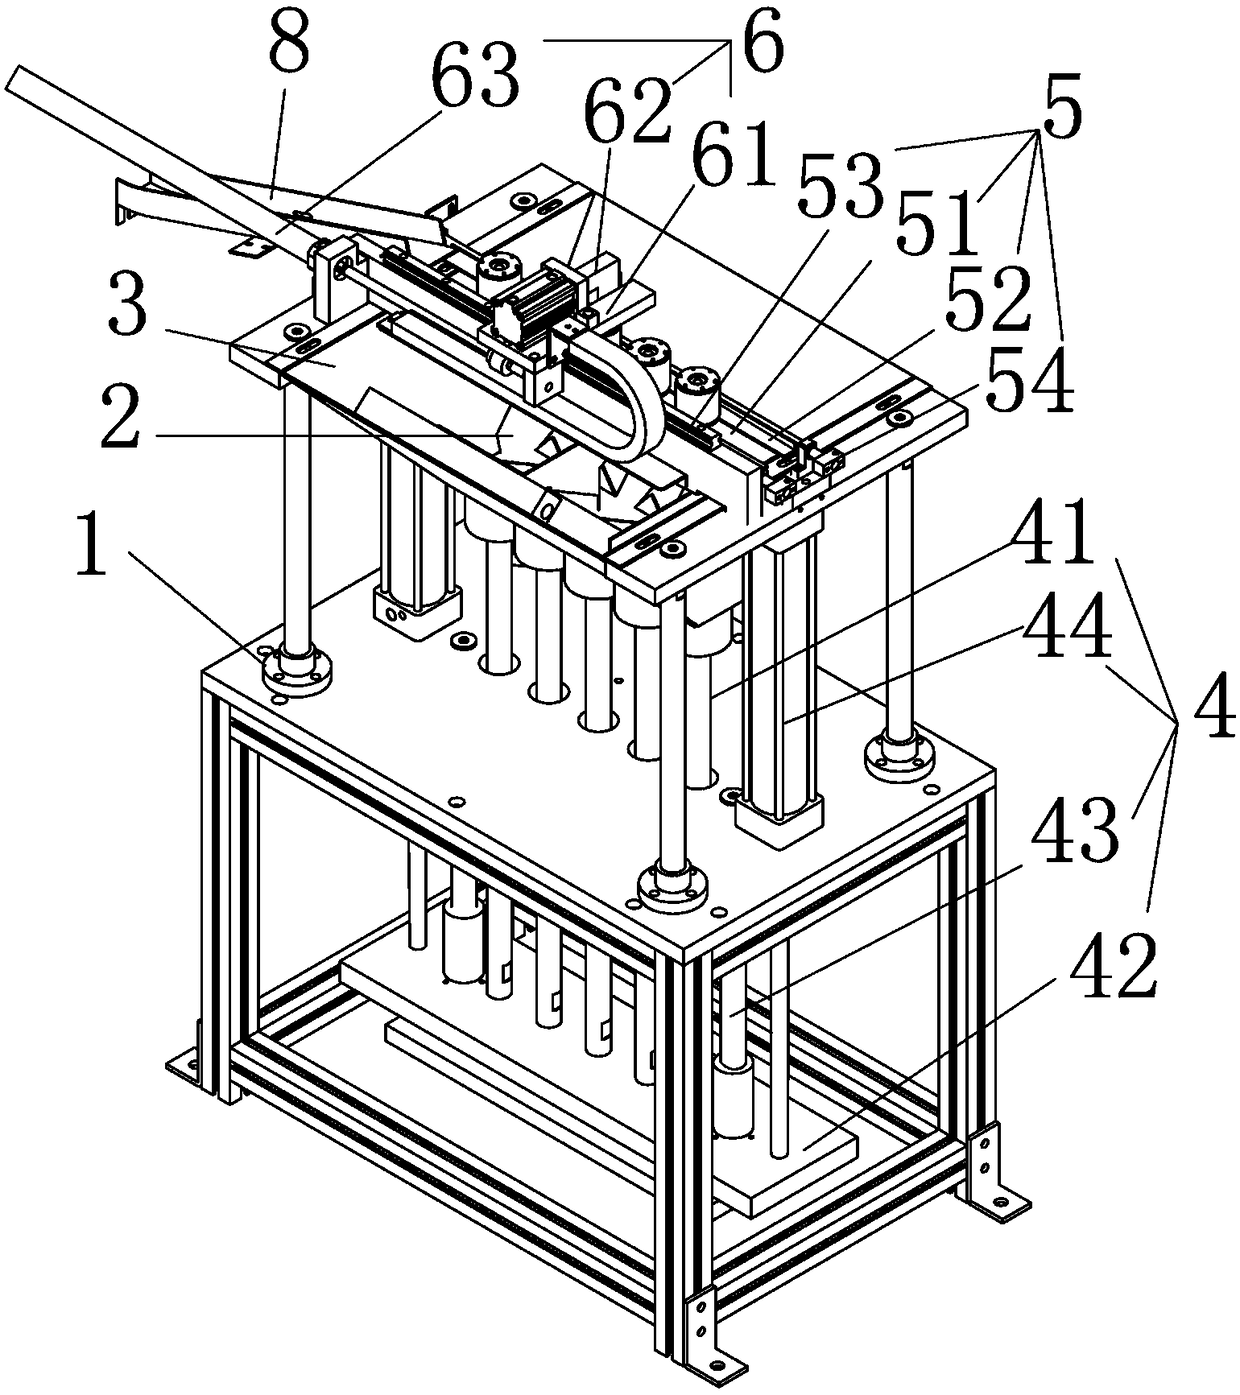 Motor rotor automatic sorting and feeding device